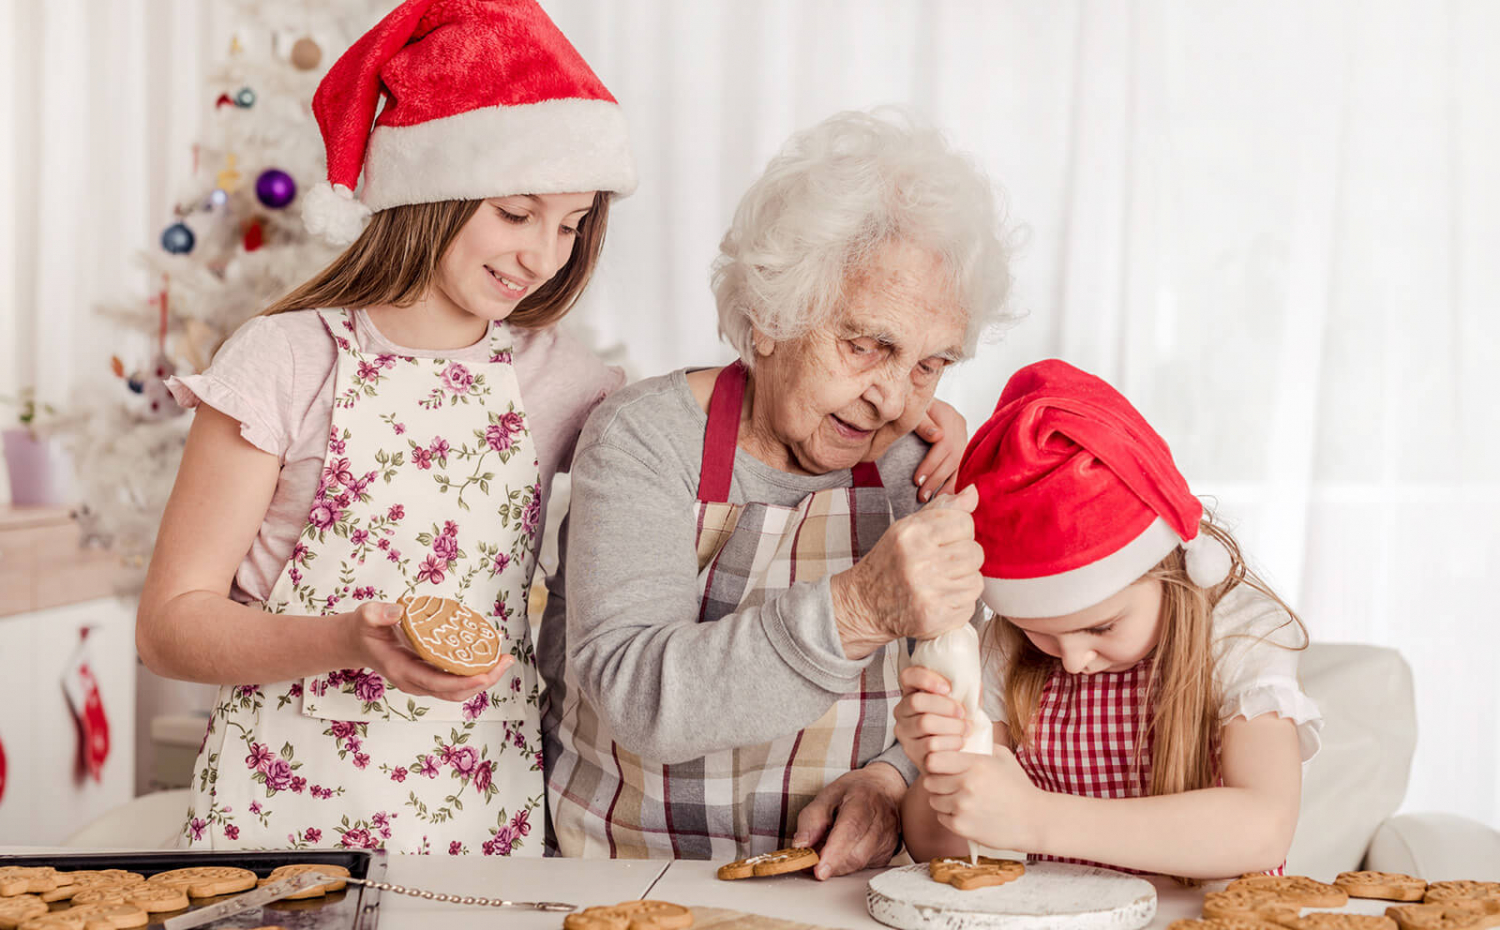 A grandmother decorating cookies with her granddaughters.